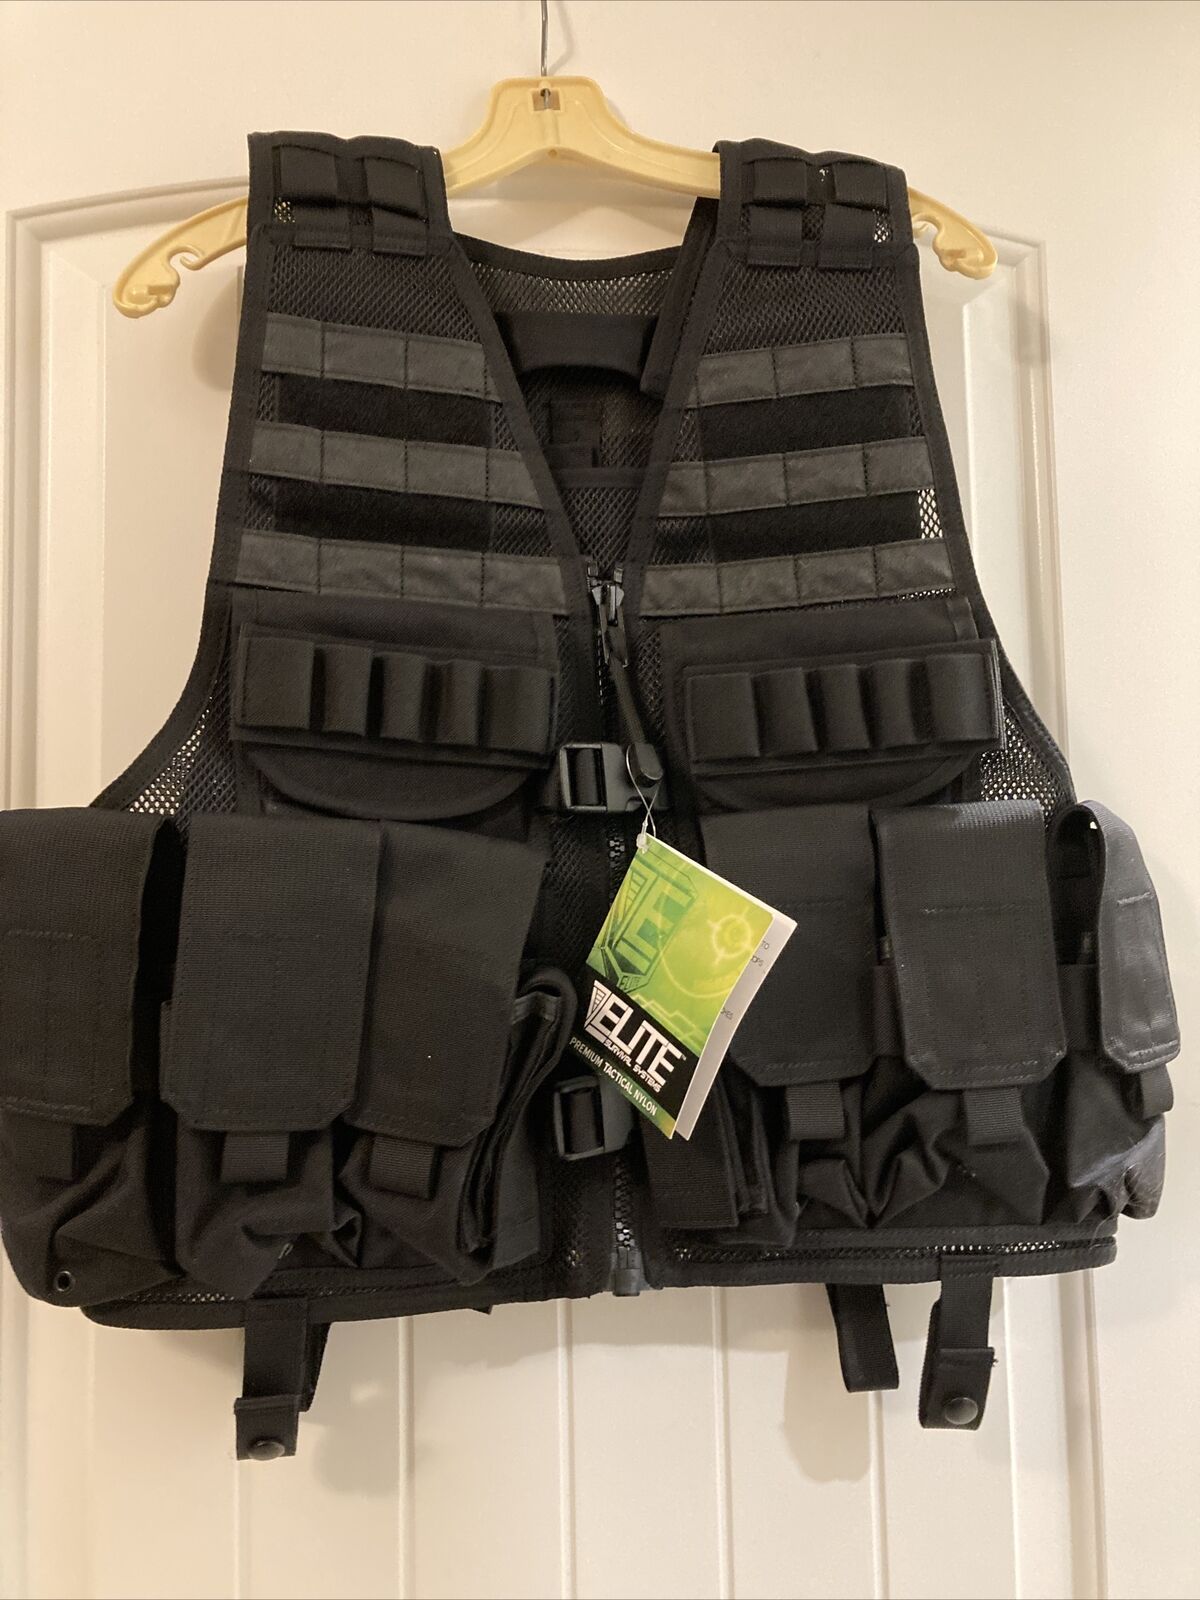 An Elite Survival Systems MVP Payload Tactical Vest hanging on a door.